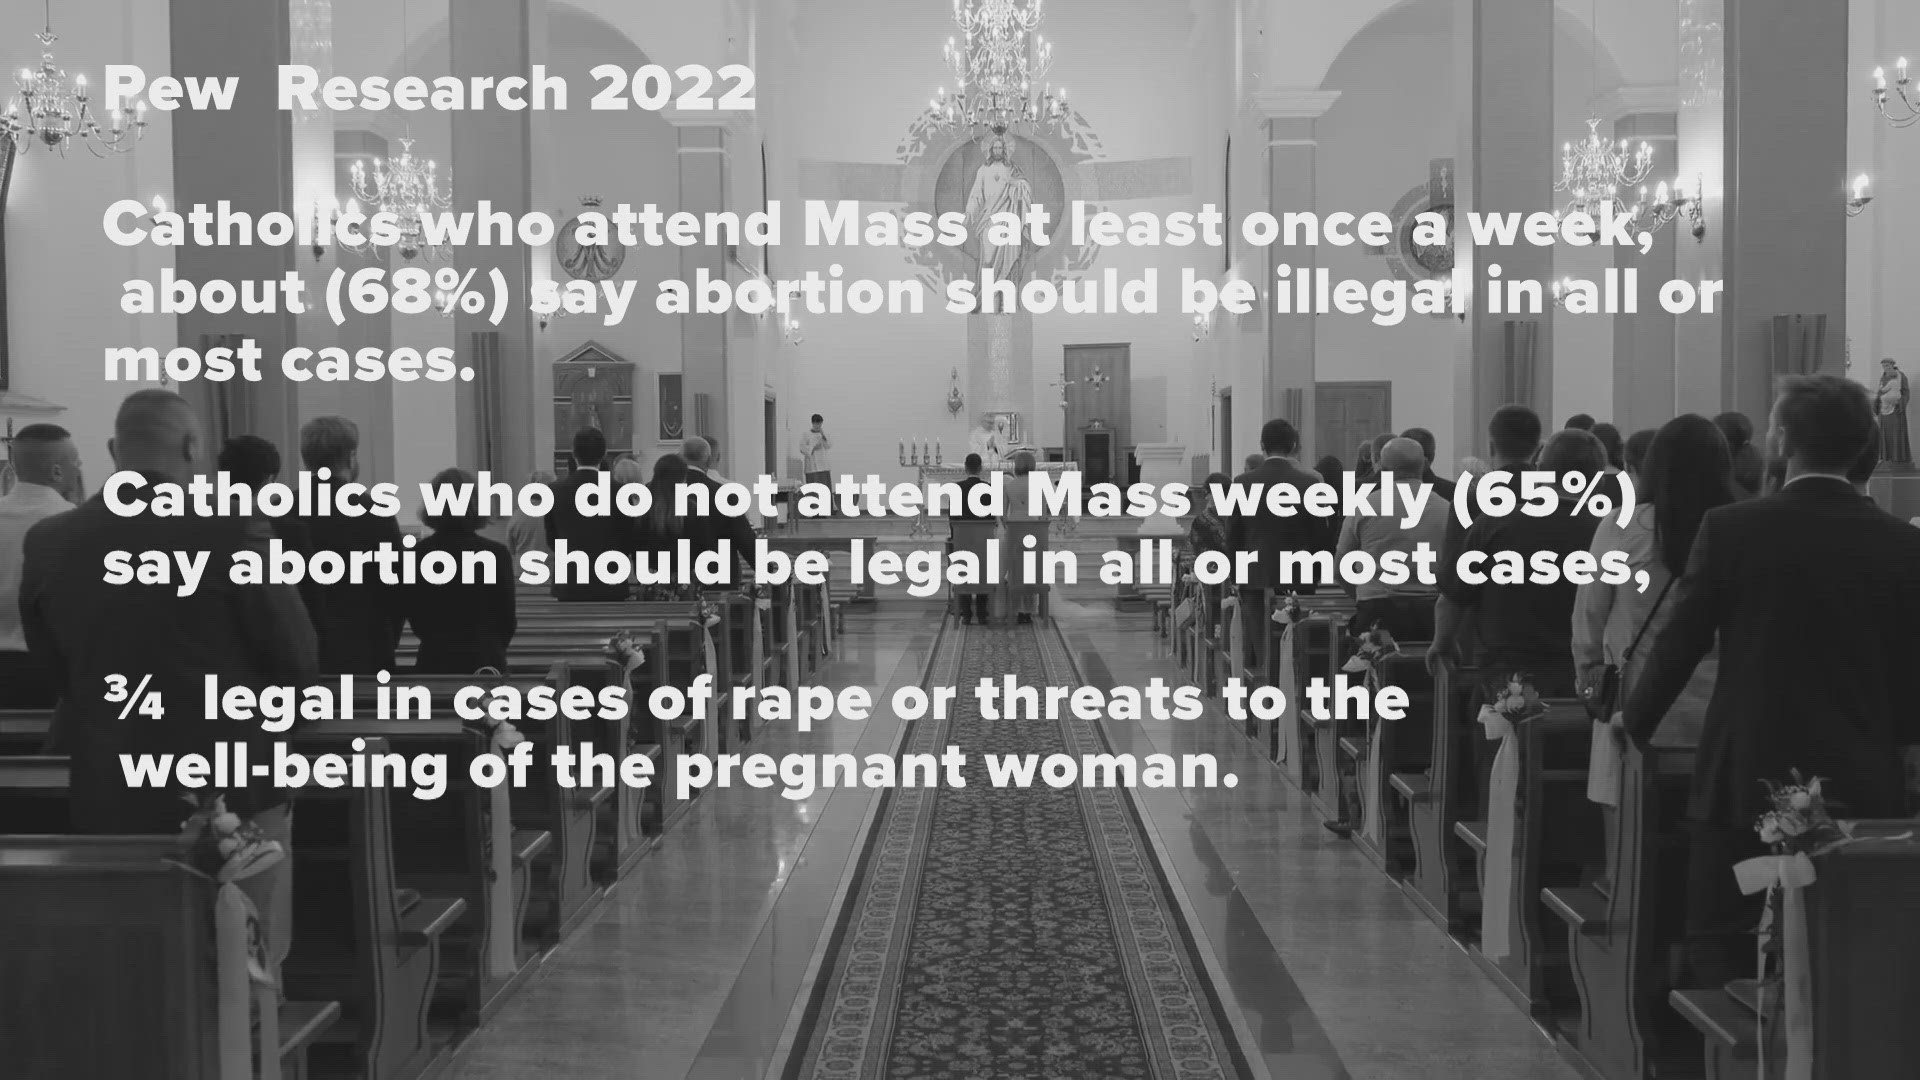 The Diocese of Cleveland is among those spending money campaigning against the ballot measure, but surveys indicate parishioners aren't in lockstep on abortion.